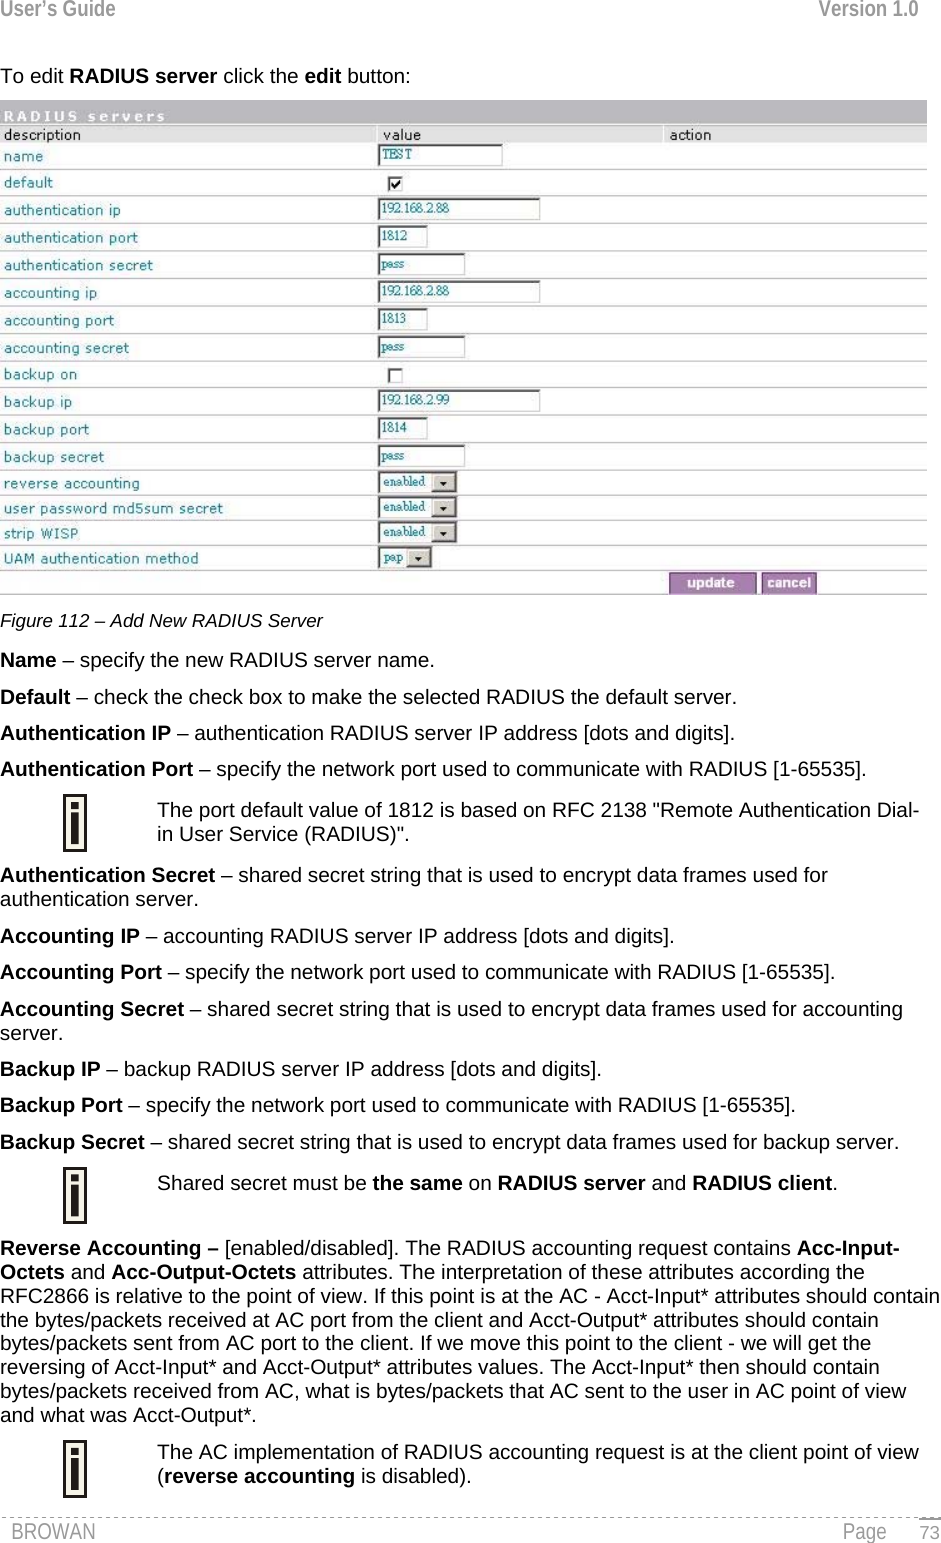 User’s Guide  Version 1.0  To edit RADIUS server click the edit button:  Figure 112 – Add New RADIUS Server Name – specify the new RADIUS server name. Default – check the check box to make the selected RADIUS the default server. Authentication IP – authentication RADIUS server IP address [dots and digits]. Authentication Port – specify the network port used to communicate with RADIUS [1-65535].  The port default value of 1812 is based on RFC 2138 &quot;Remote Authentication Dial-in User Service (RADIUS)&quot;. Authentication Secret – shared secret string that is used to encrypt data frames used for authentication server. Accounting IP – accounting RADIUS server IP address [dots and digits]. Accounting Port – specify the network port used to communicate with RADIUS [1-65535]. Accounting Secret – shared secret string that is used to encrypt data frames used for accounting server. Backup IP – backup RADIUS server IP address [dots and digits]. Backup Port – specify the network port used to communicate with RADIUS [1-65535]. Backup Secret – shared secret string that is used to encrypt data frames used for backup server.  Shared secret must be the same on RADIUS server and RADIUS client. Reverse Accounting – [enabled/disabled]. The RADIUS accounting request contains Acc-Input-Octets and Acc-Output-Octets attributes. The interpretation of these attributes according the RFC2866 is relative to the point of view. If this point is at the AC - Acct-Input* attributes should contain the bytes/packets received at AC port from the client and Acct-Output* attributes should contain bytes/packets sent from AC port to the client. If we move this point to the client - we will get the reversing of Acct-Input* and Acct-Output* attributes values. The Acct-Input* then should contain bytes/packets received from AC, what is bytes/packets that AC sent to the user in AC point of view and what was Acct-Output*. The AC implementation of RADIUS accounting request is at the client point of view (reverse accounting is disabled).   BROWAN                                                                                                                                               Page   73